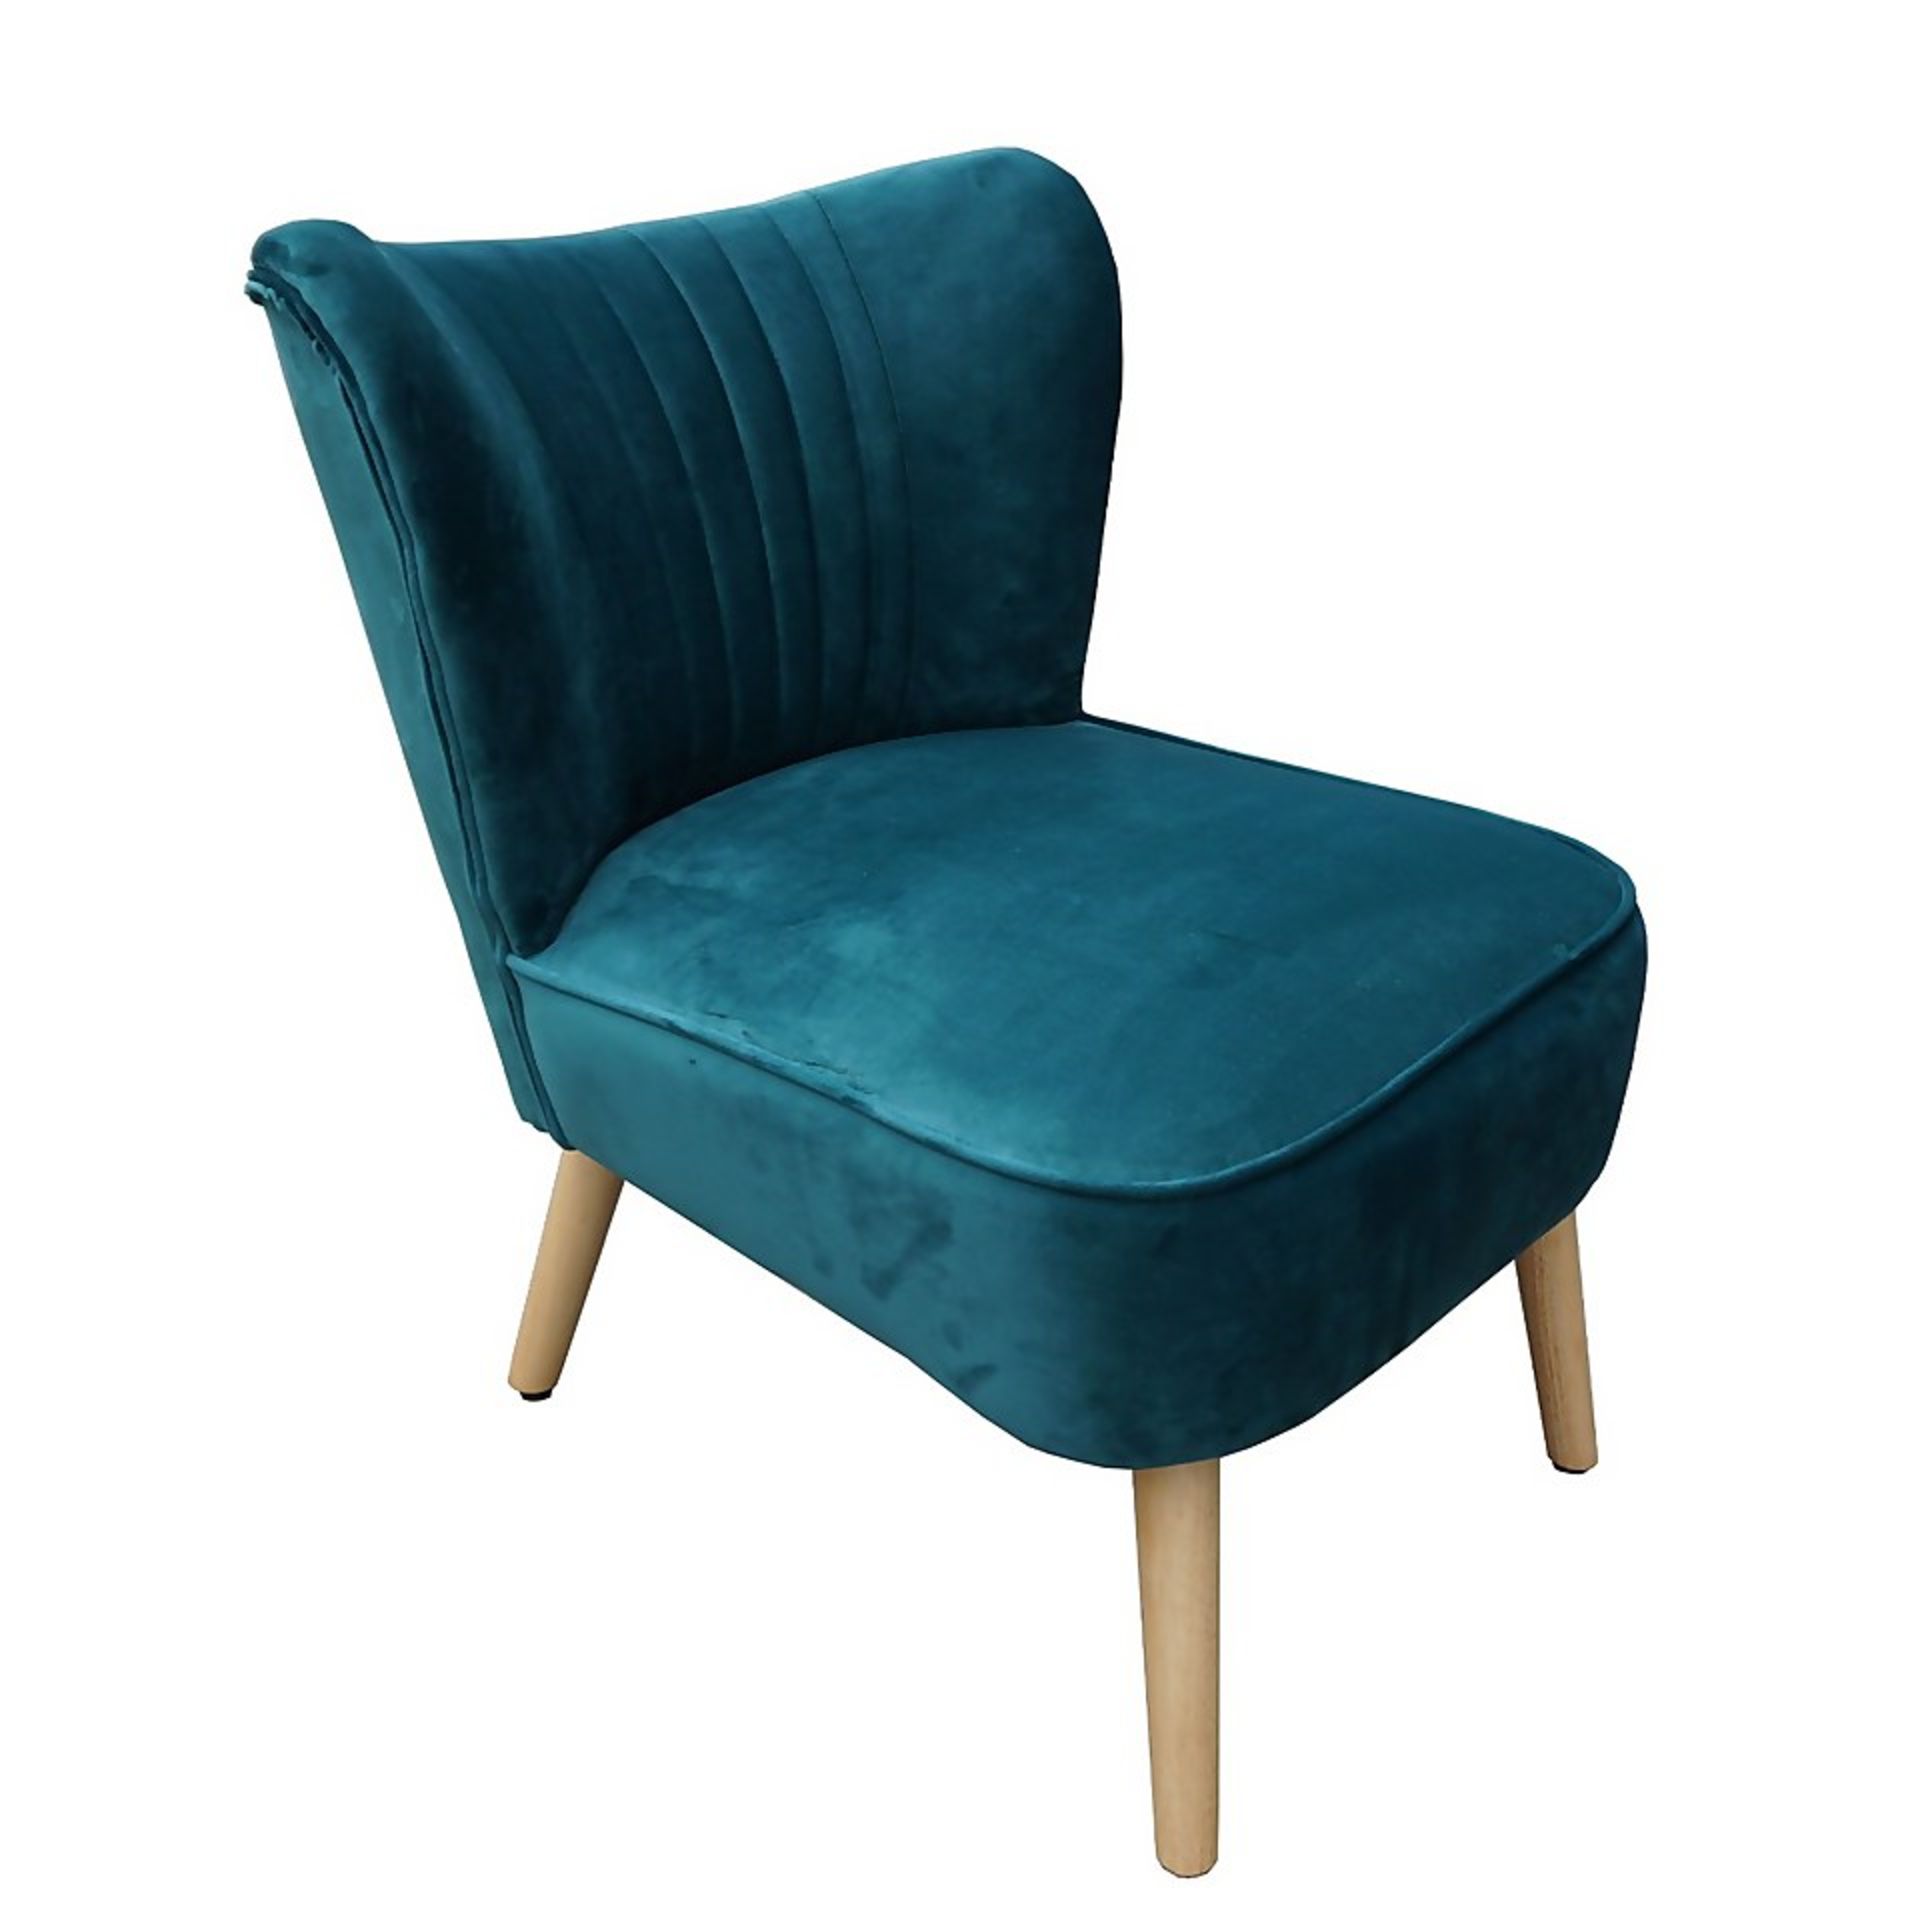 (R7L) 1 X Occasional Chair Teal. Velvet Fabric Cover. Rubberwood Legs. (H72xW60xD70cm) RRP £60 - Image 2 of 6